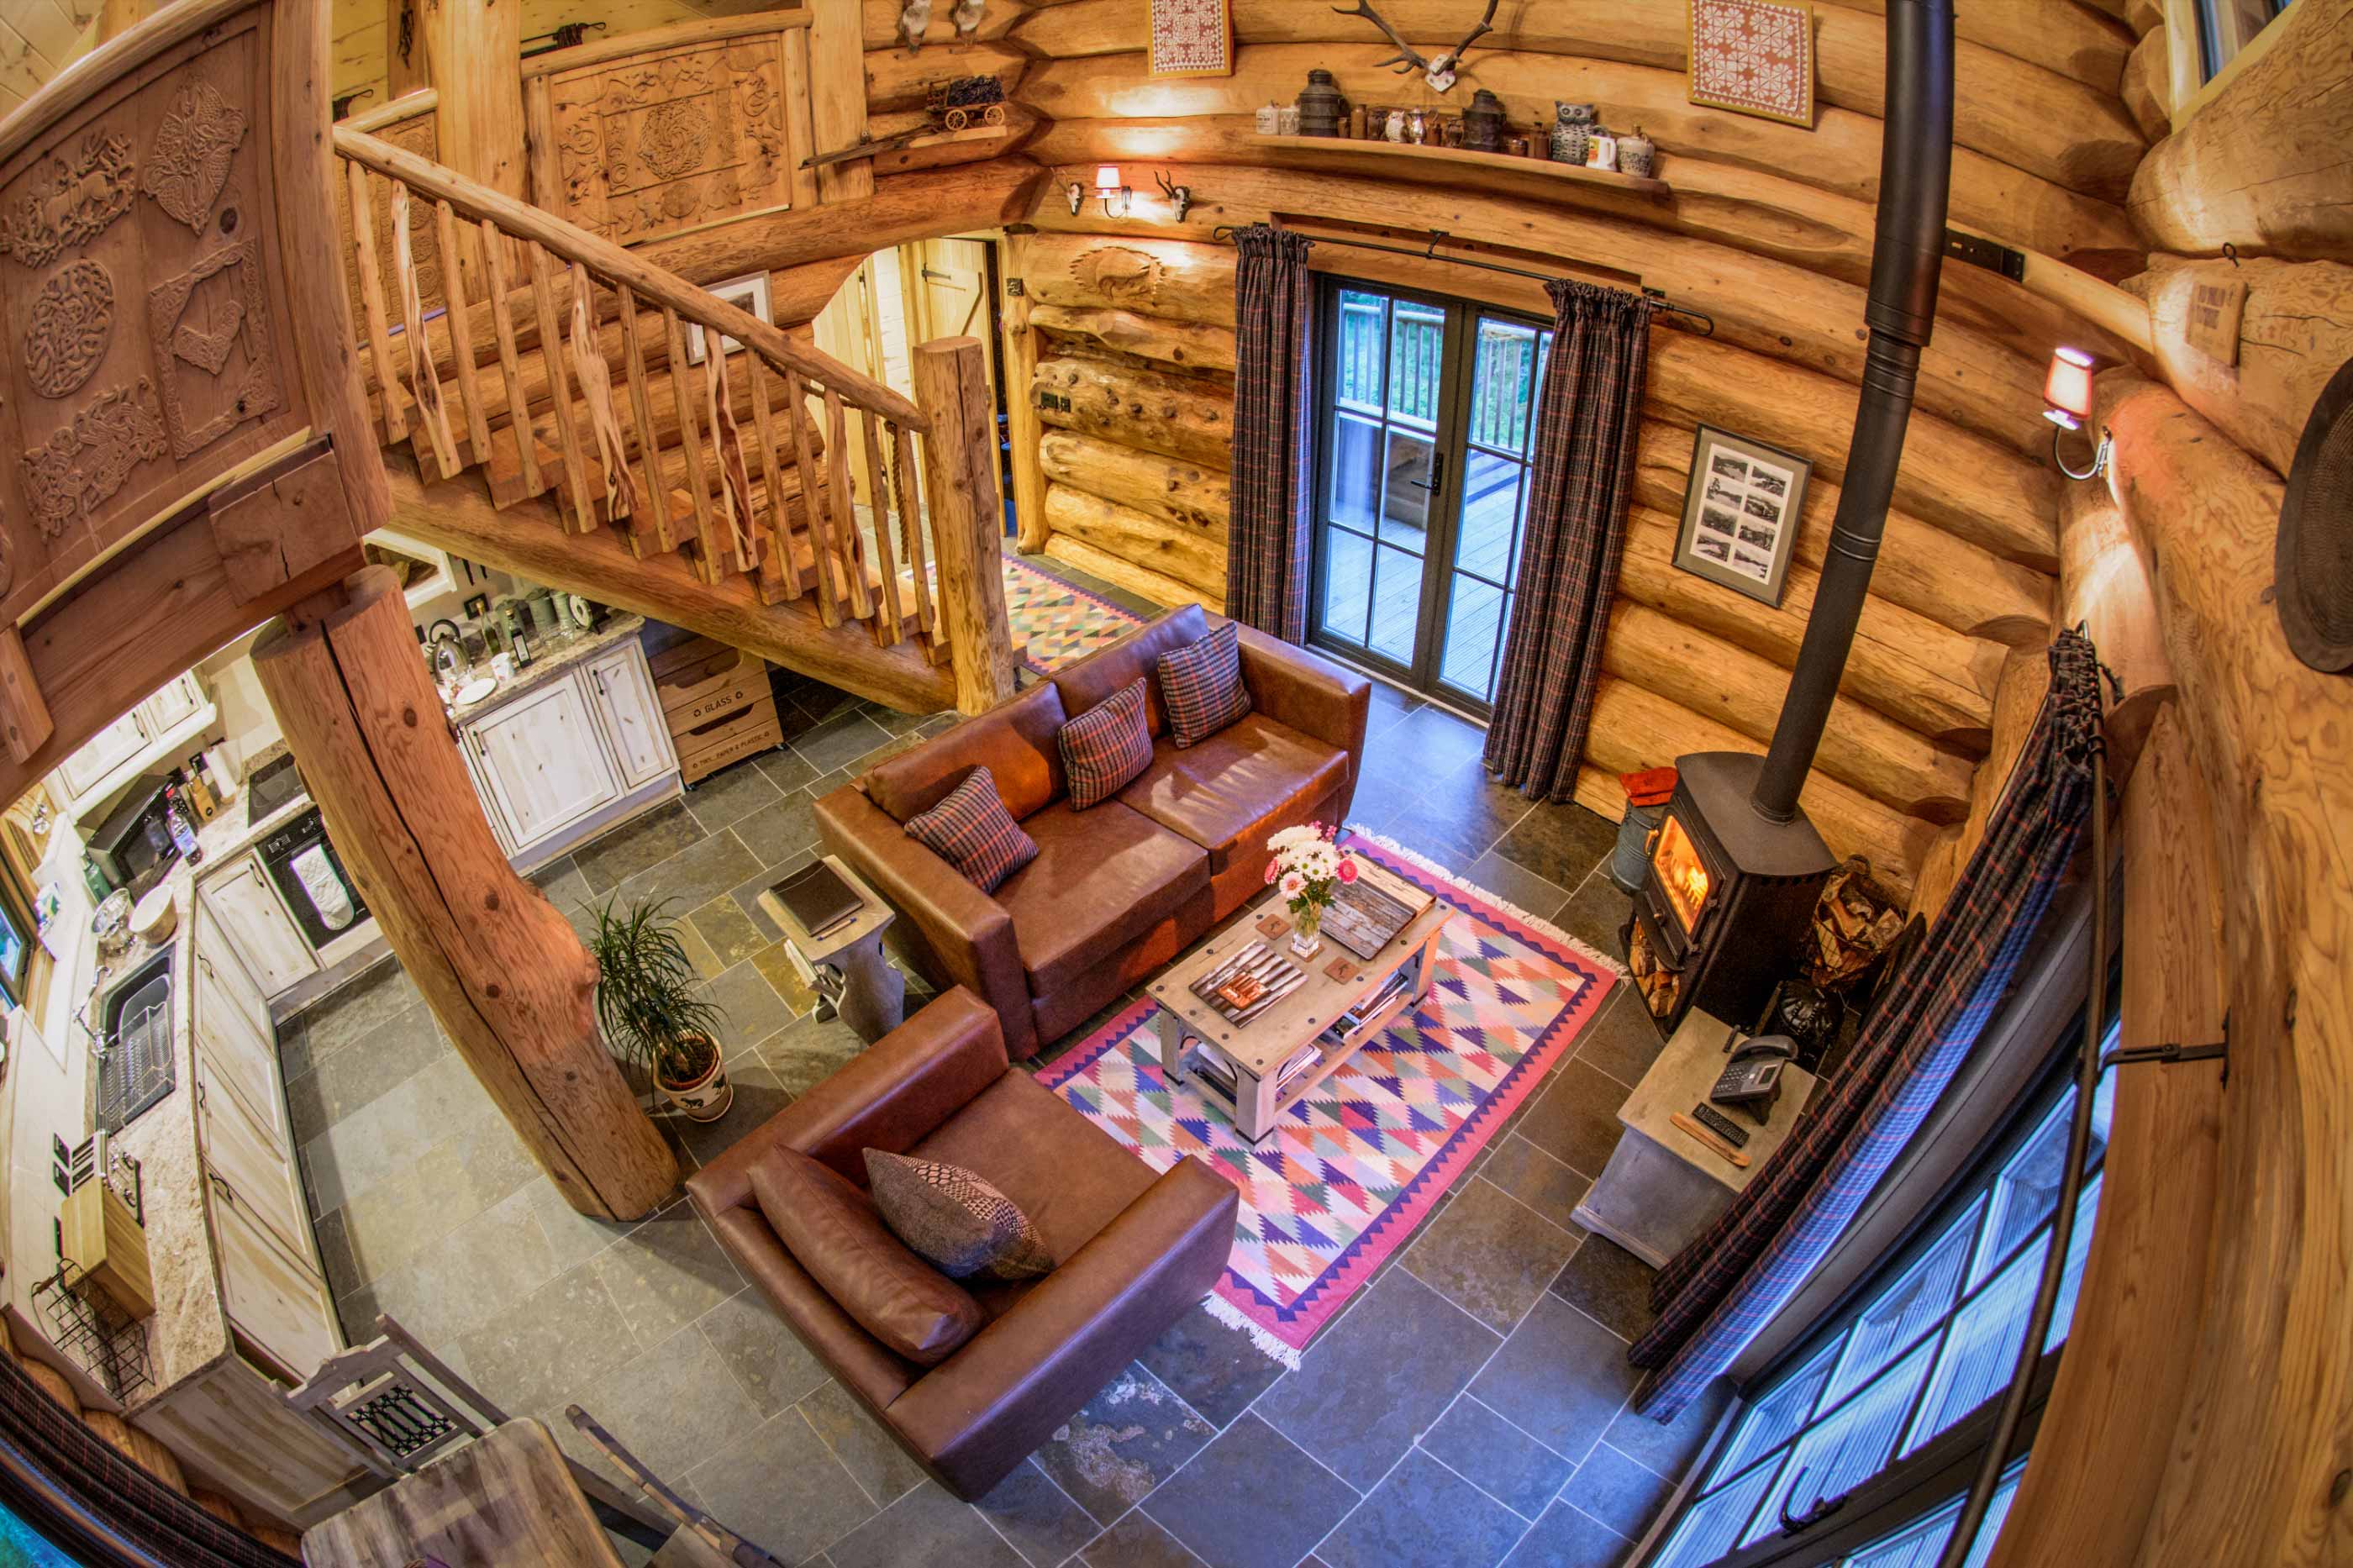 A view of the beautifully crafted interior of Strix log cabin